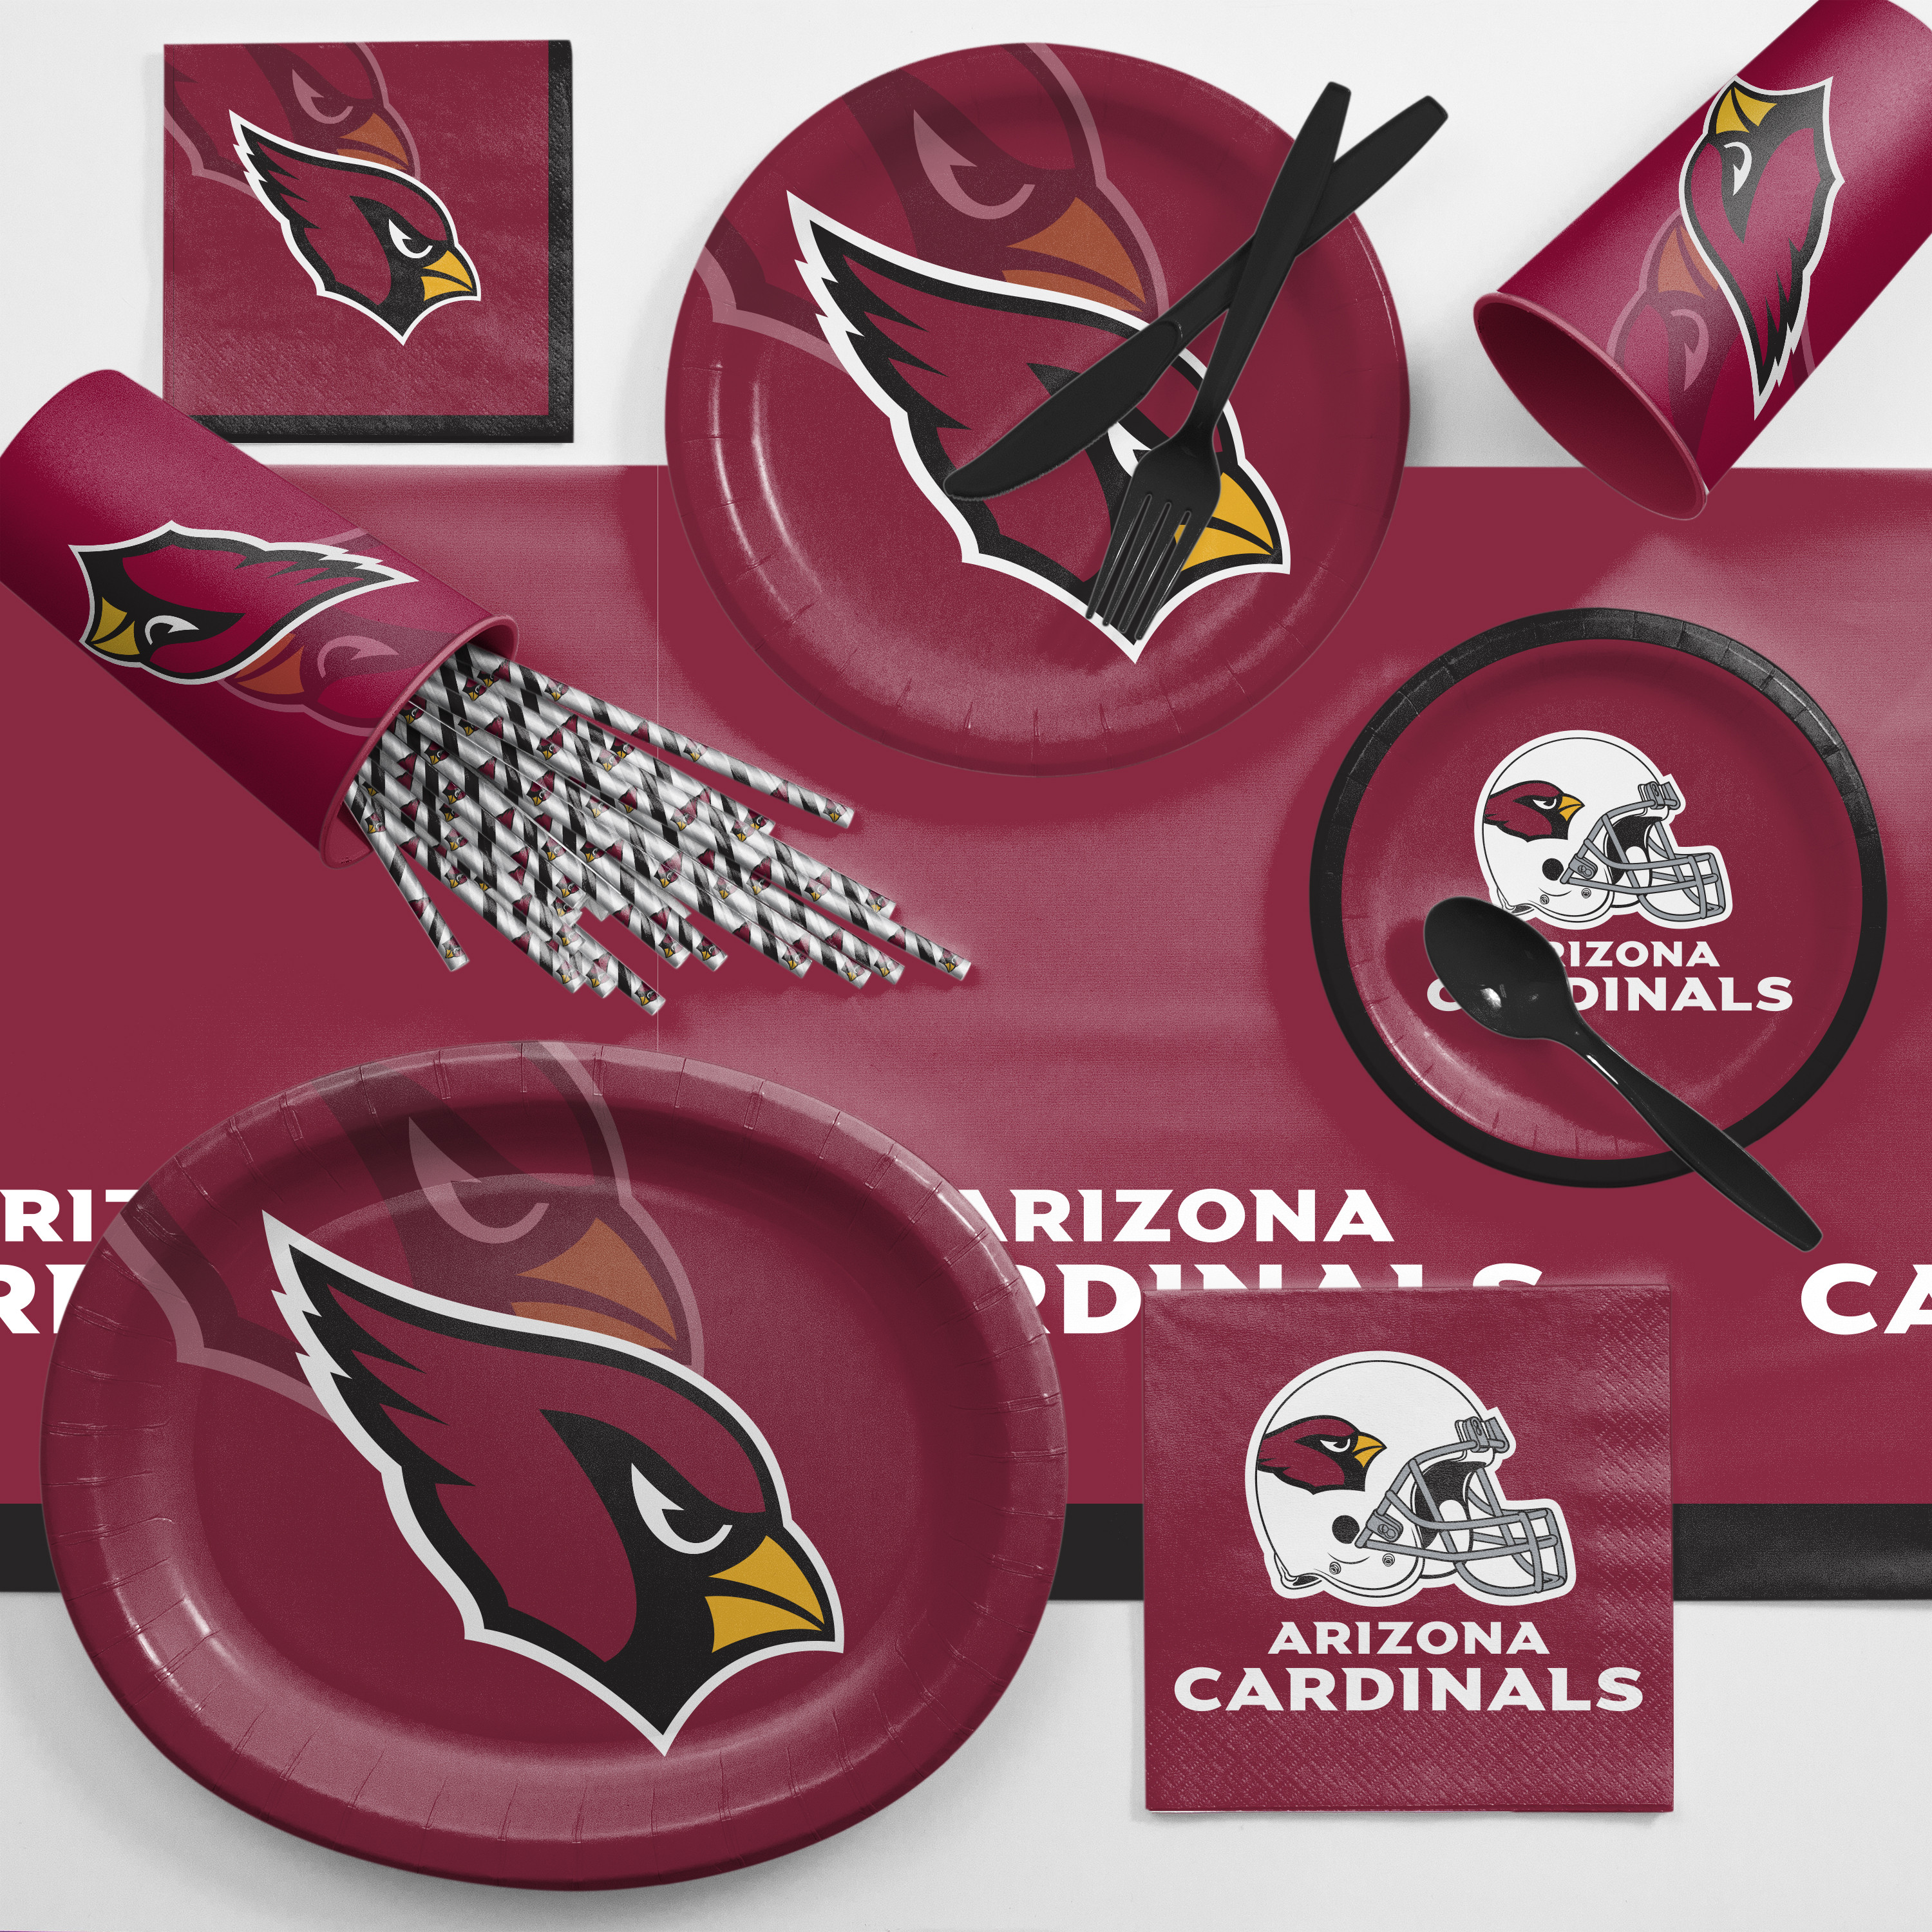 Arizona Cardinals Plastic Cups, 24 Count for 24 Guests - image 4 of 4